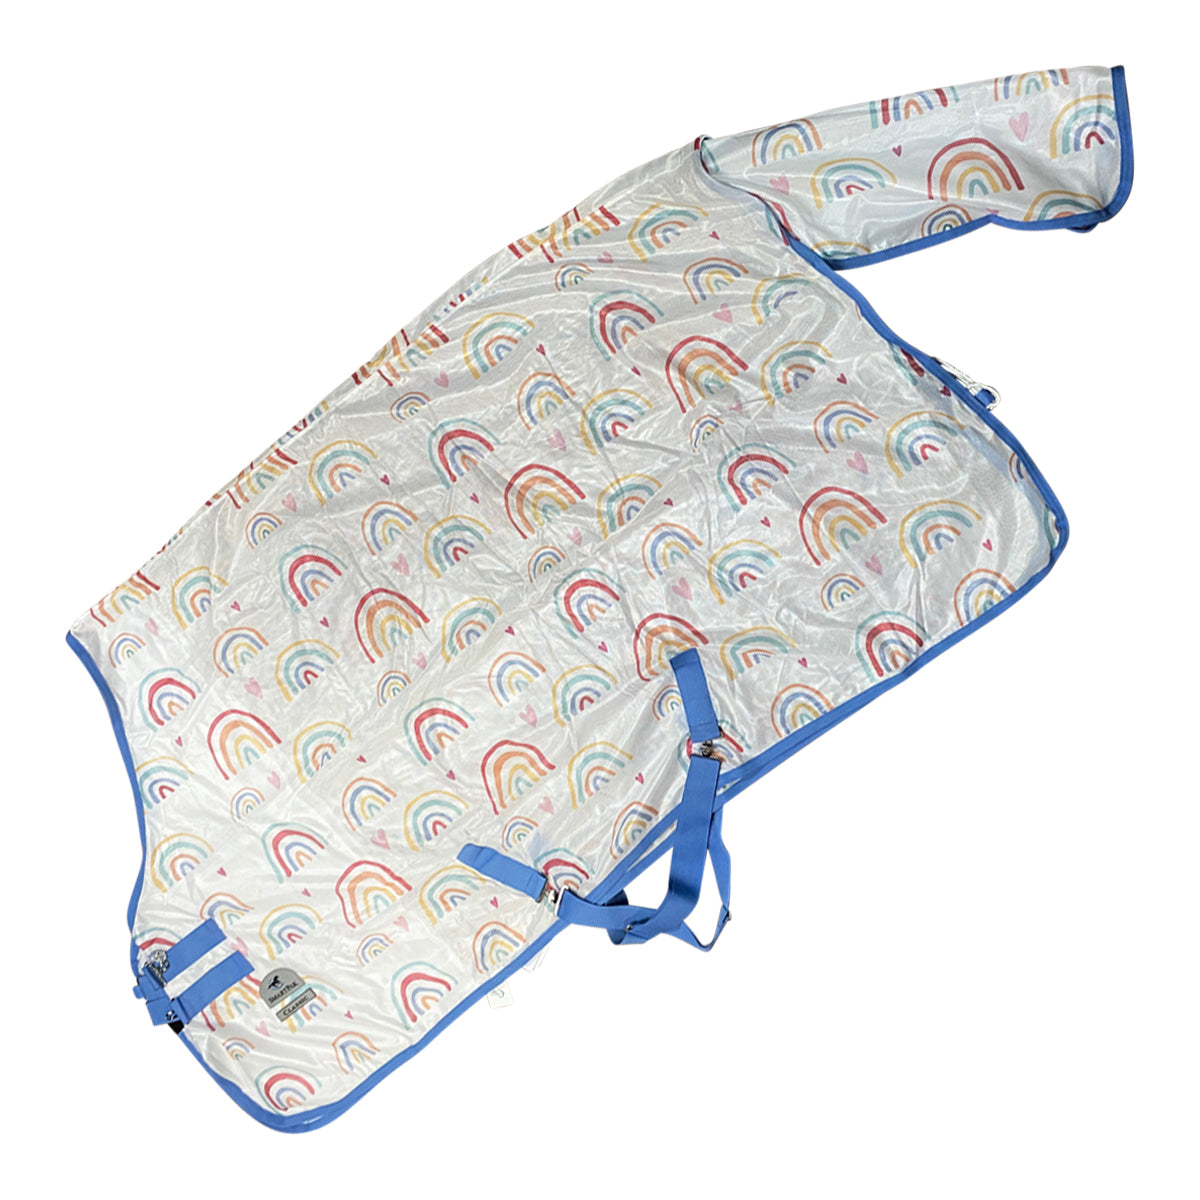 SmartPak Classic Patterned Fly Sheet in White w/Rainbow